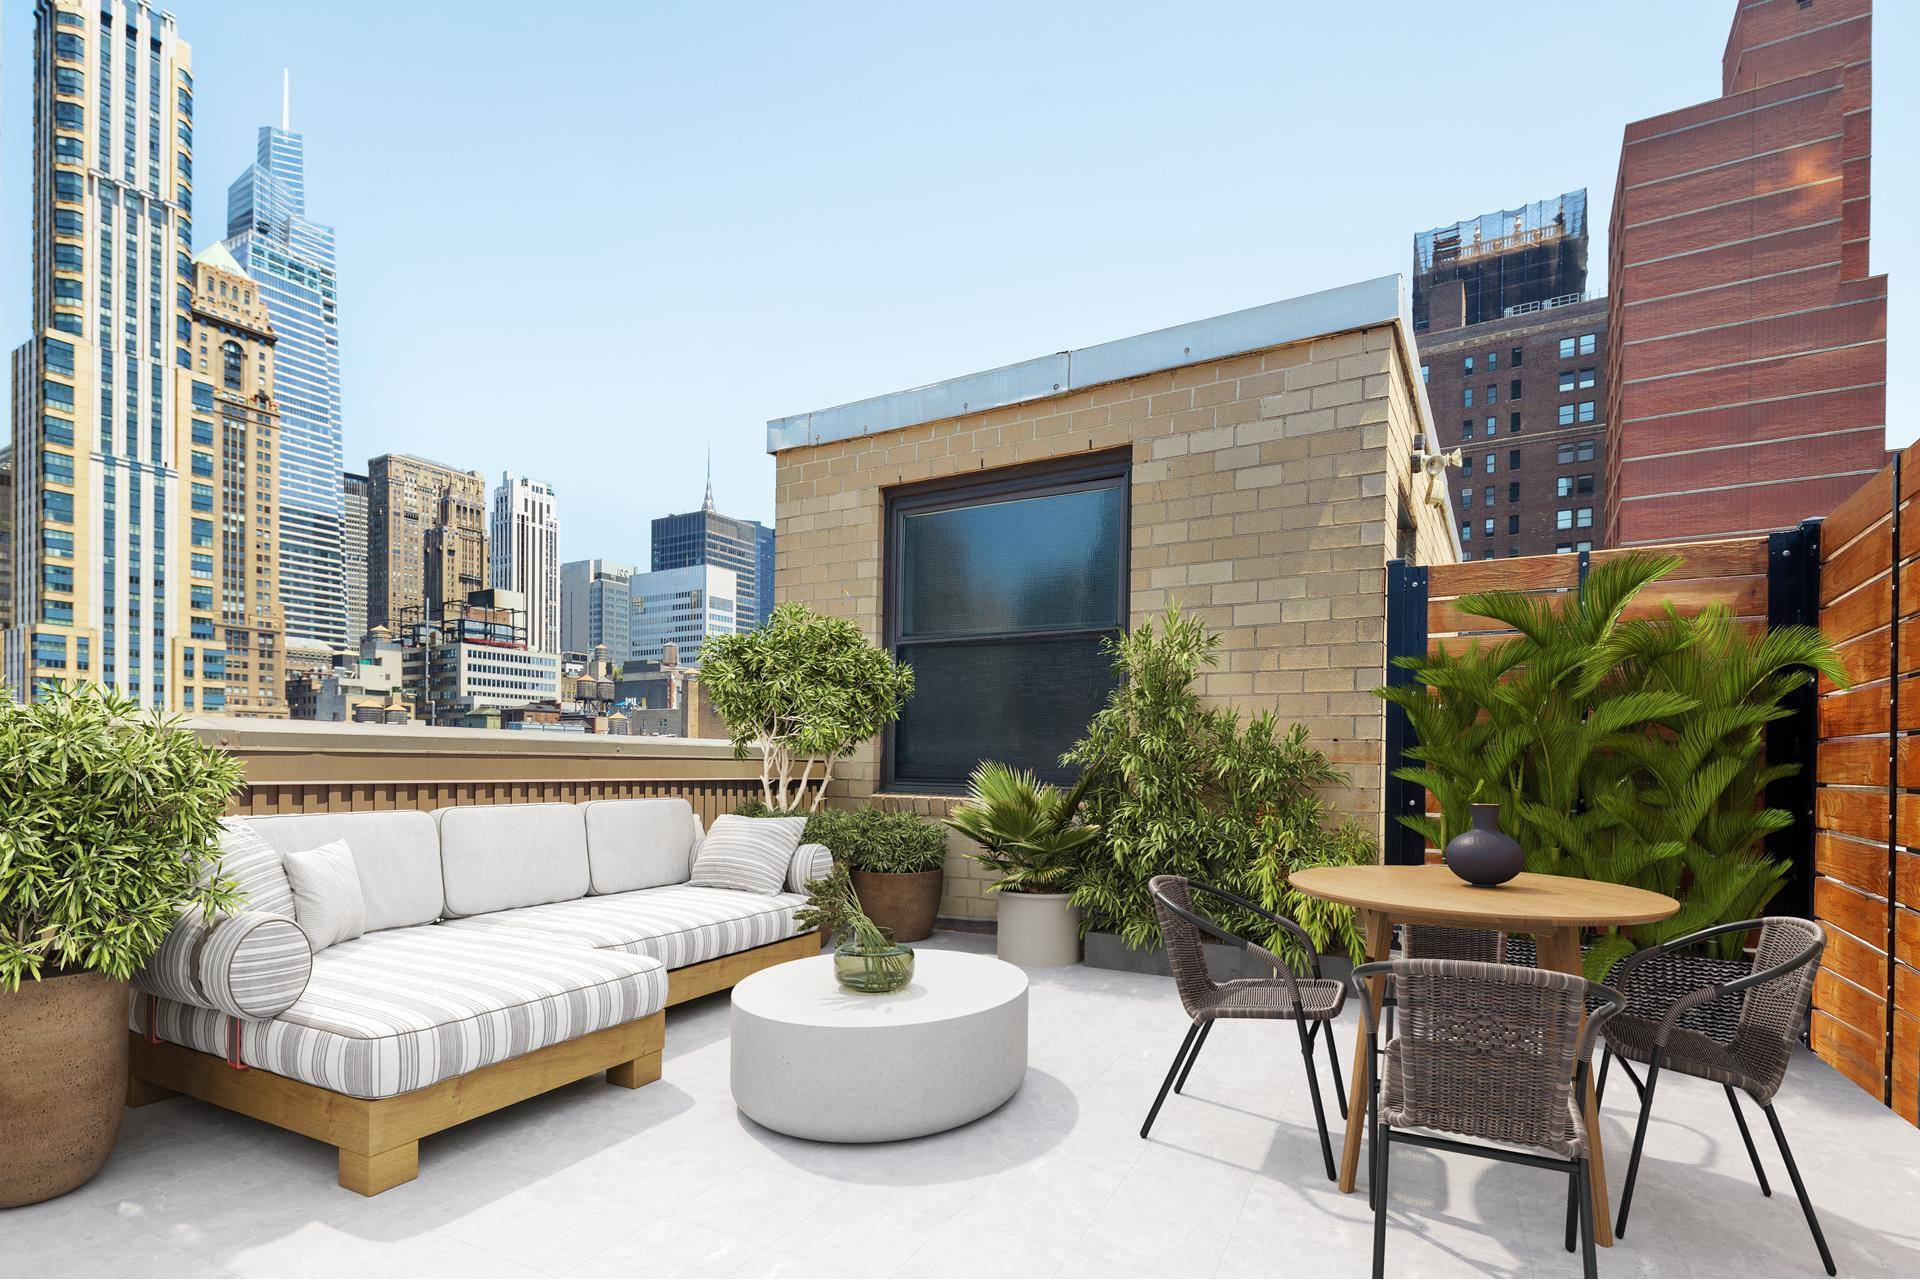 Stylish and sophisticated Penthouse Duplex with a Rooftop Terrace and Wood Burning Fireplace in a prime location !